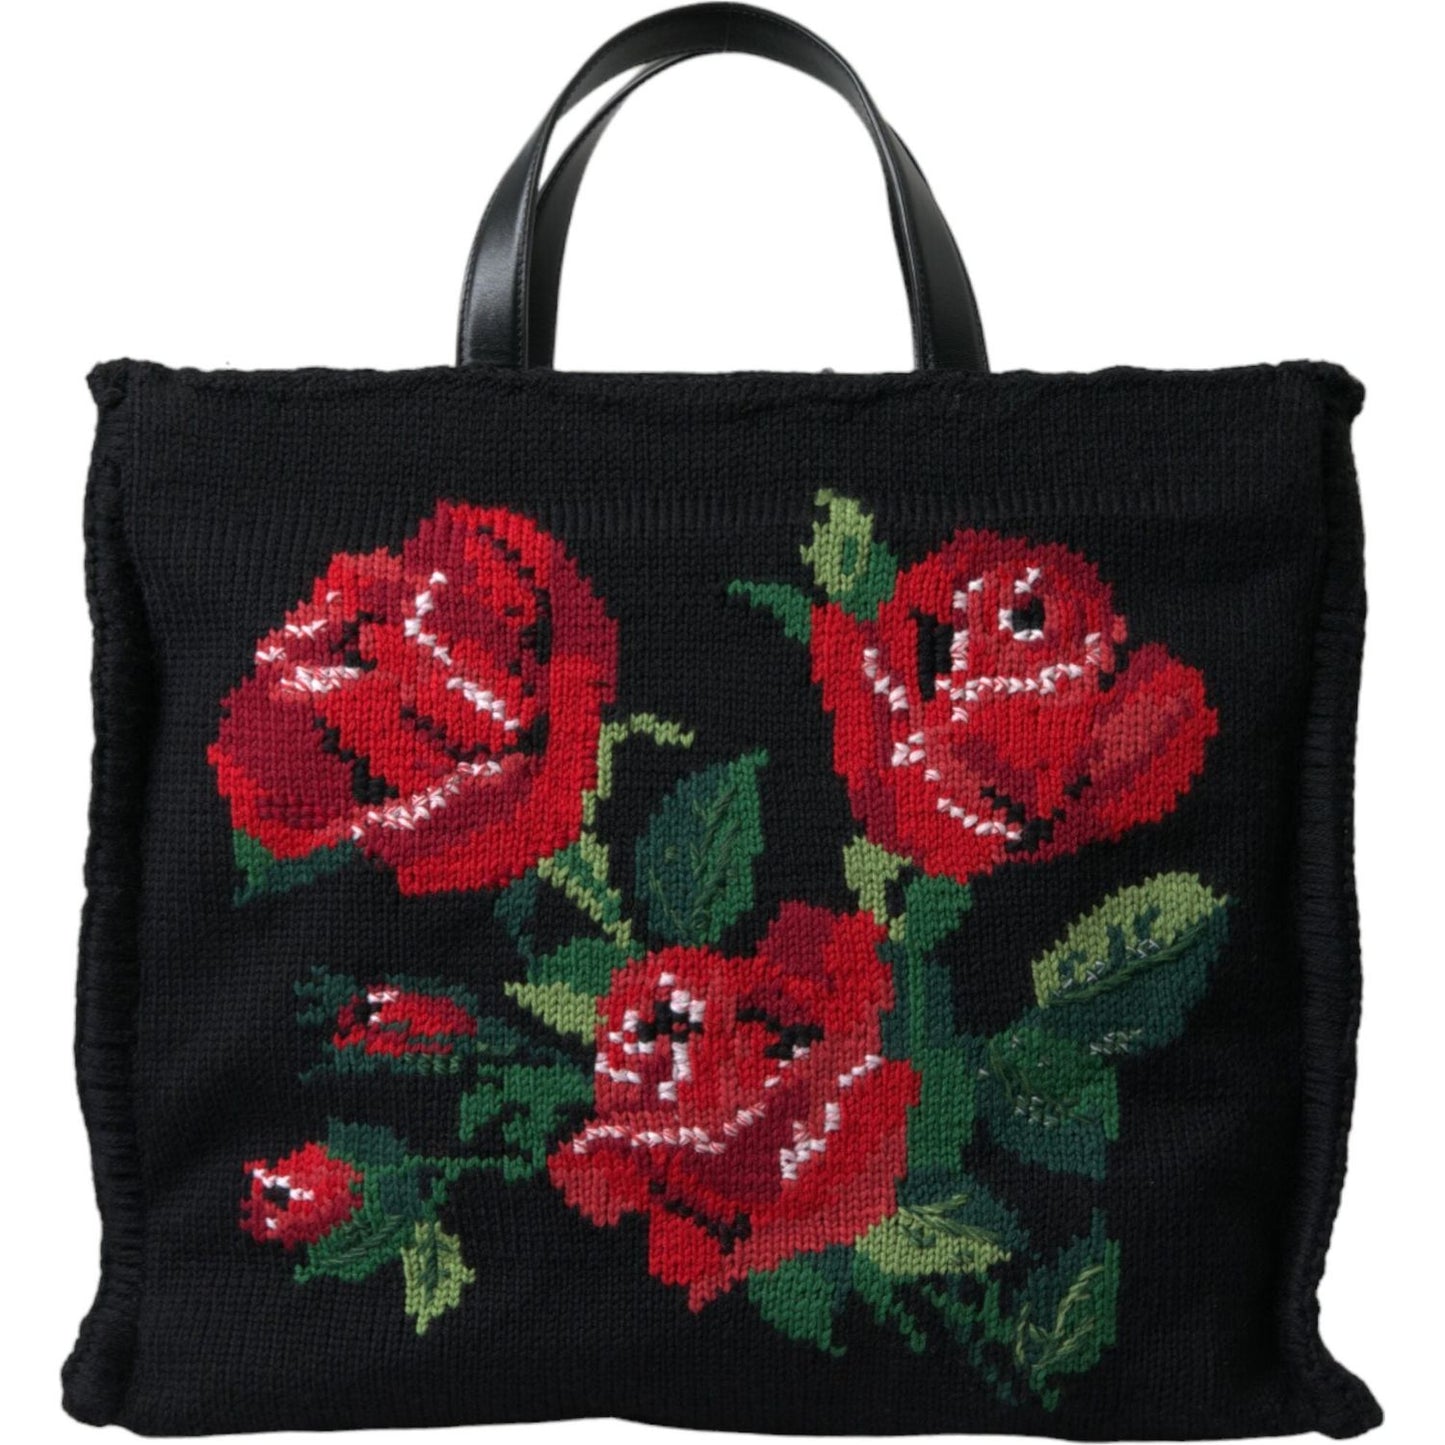 Dolce & Gabbana Chic Embroidered Floral Black Tote chic-embroidered-floral-black-tote